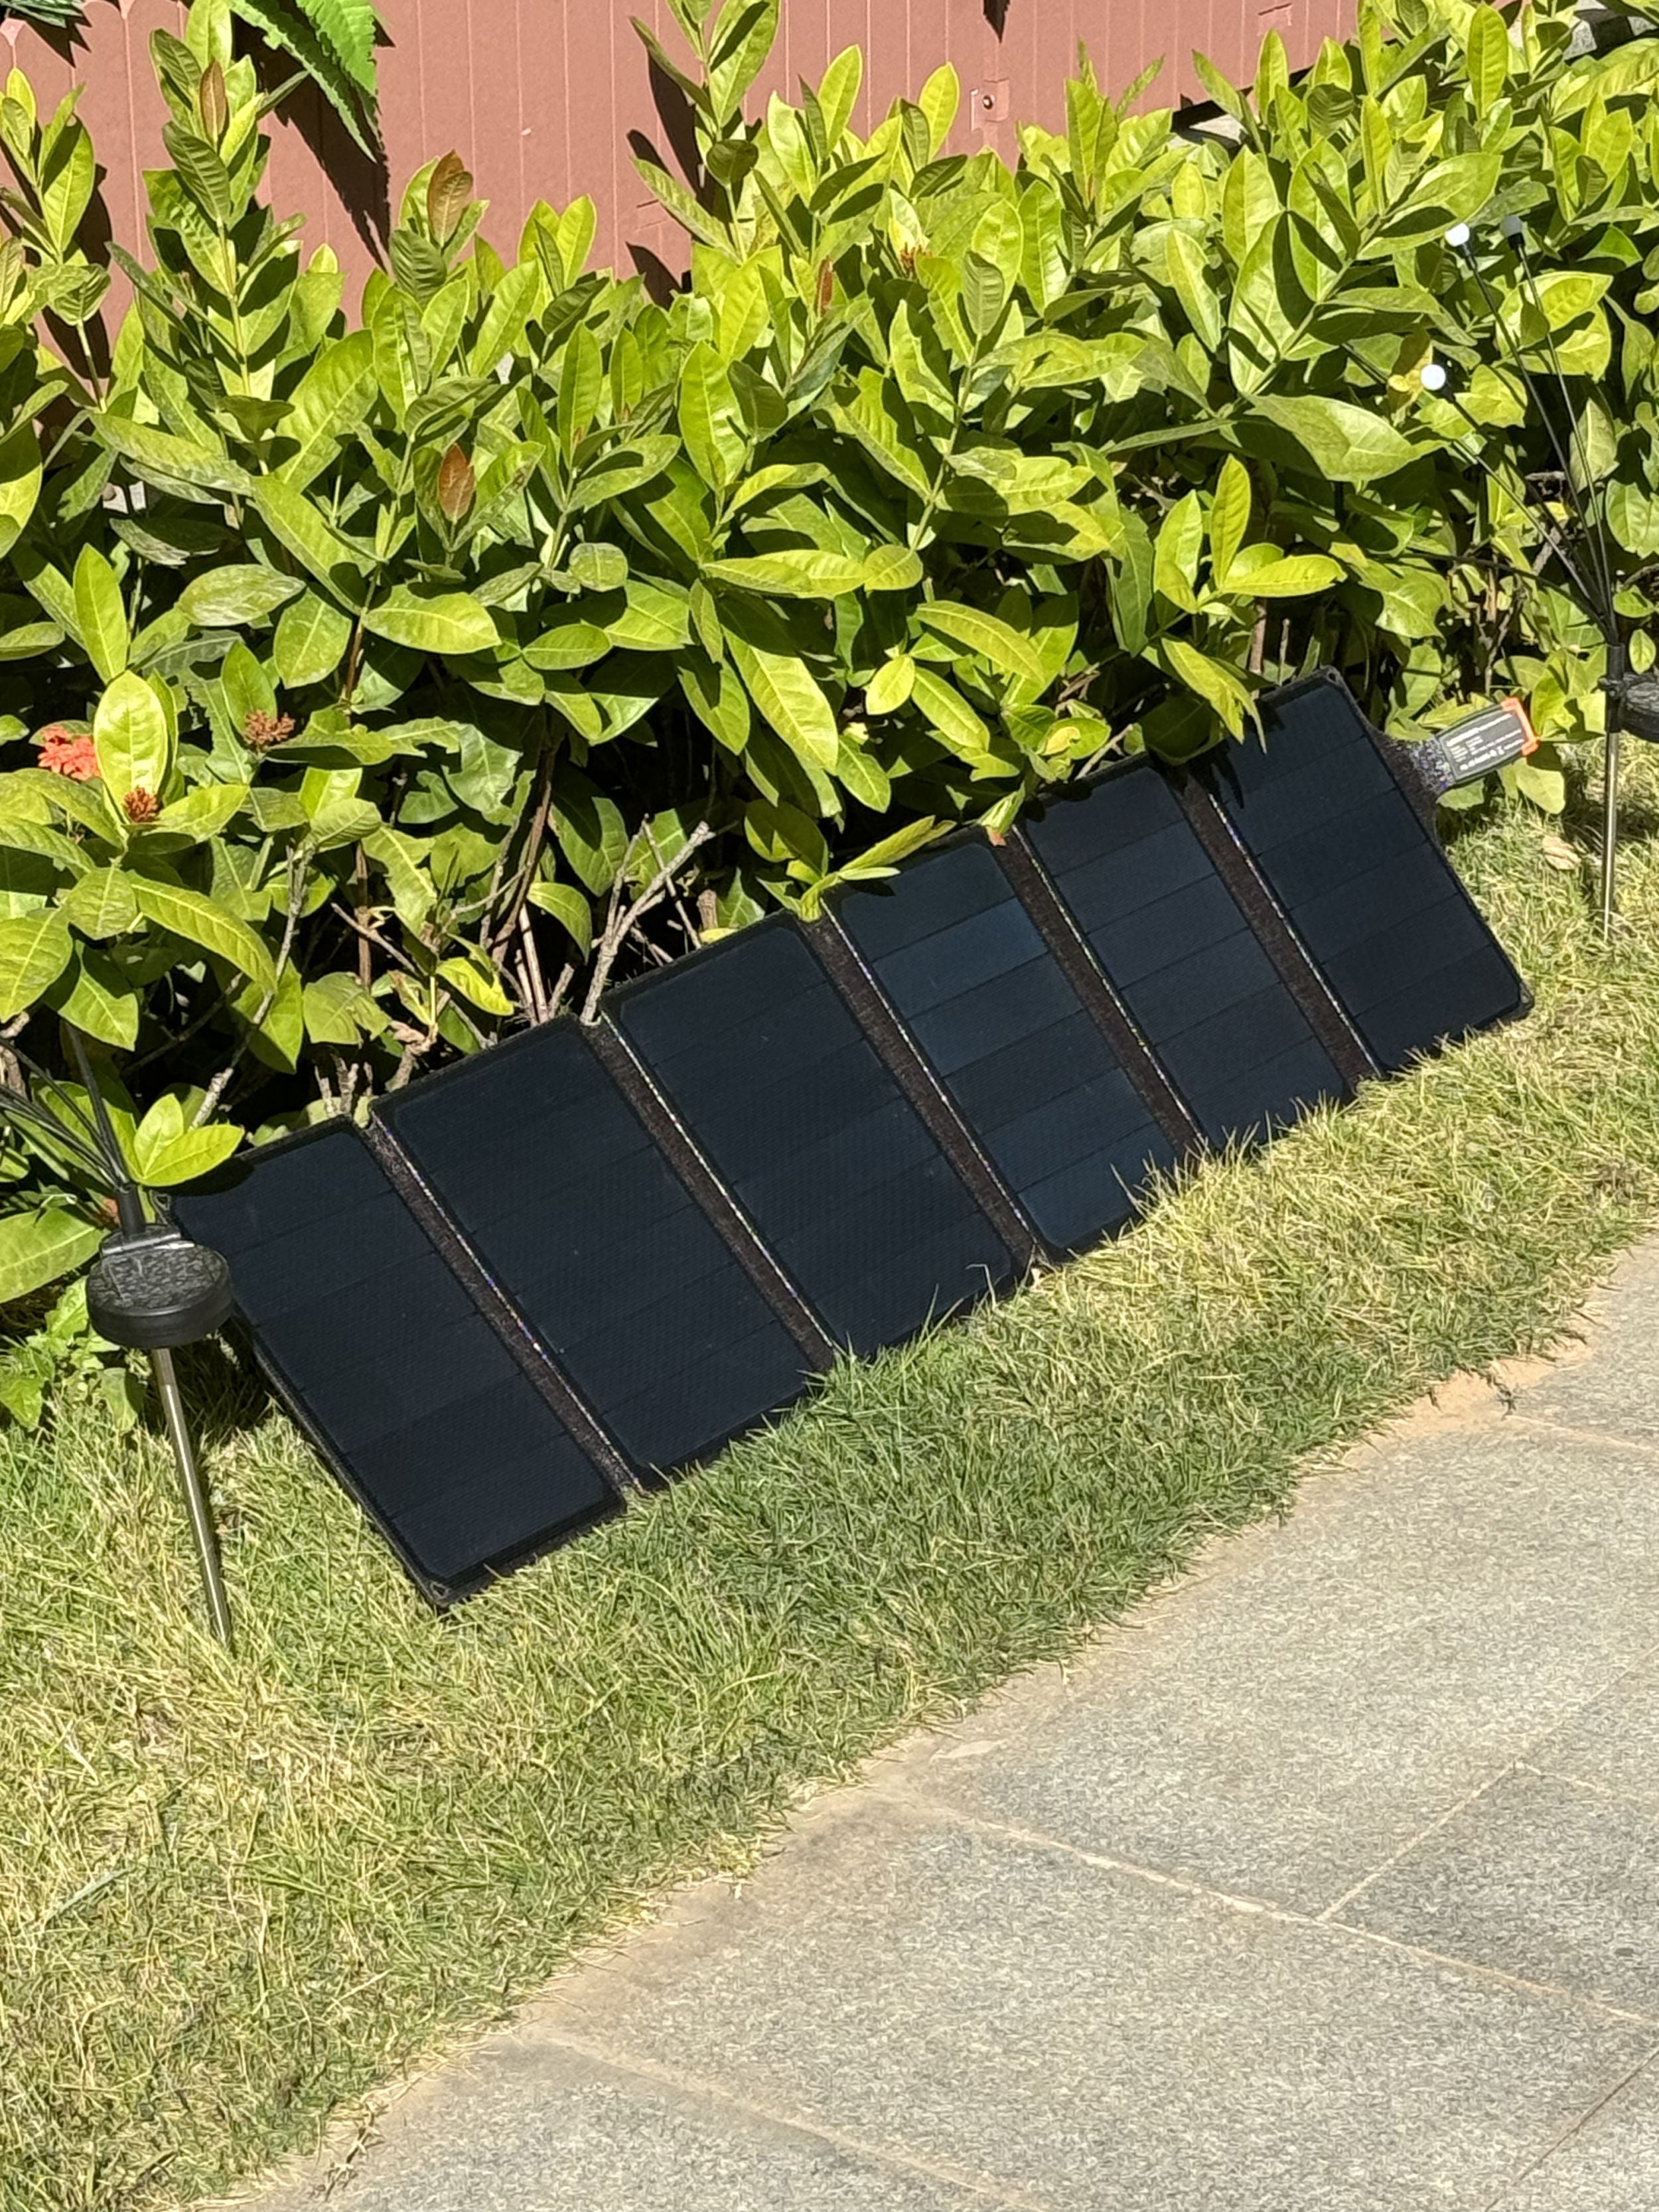 LMENGER 56W USB Solar Panel: Your Ultimate Outdoor Charging Companion